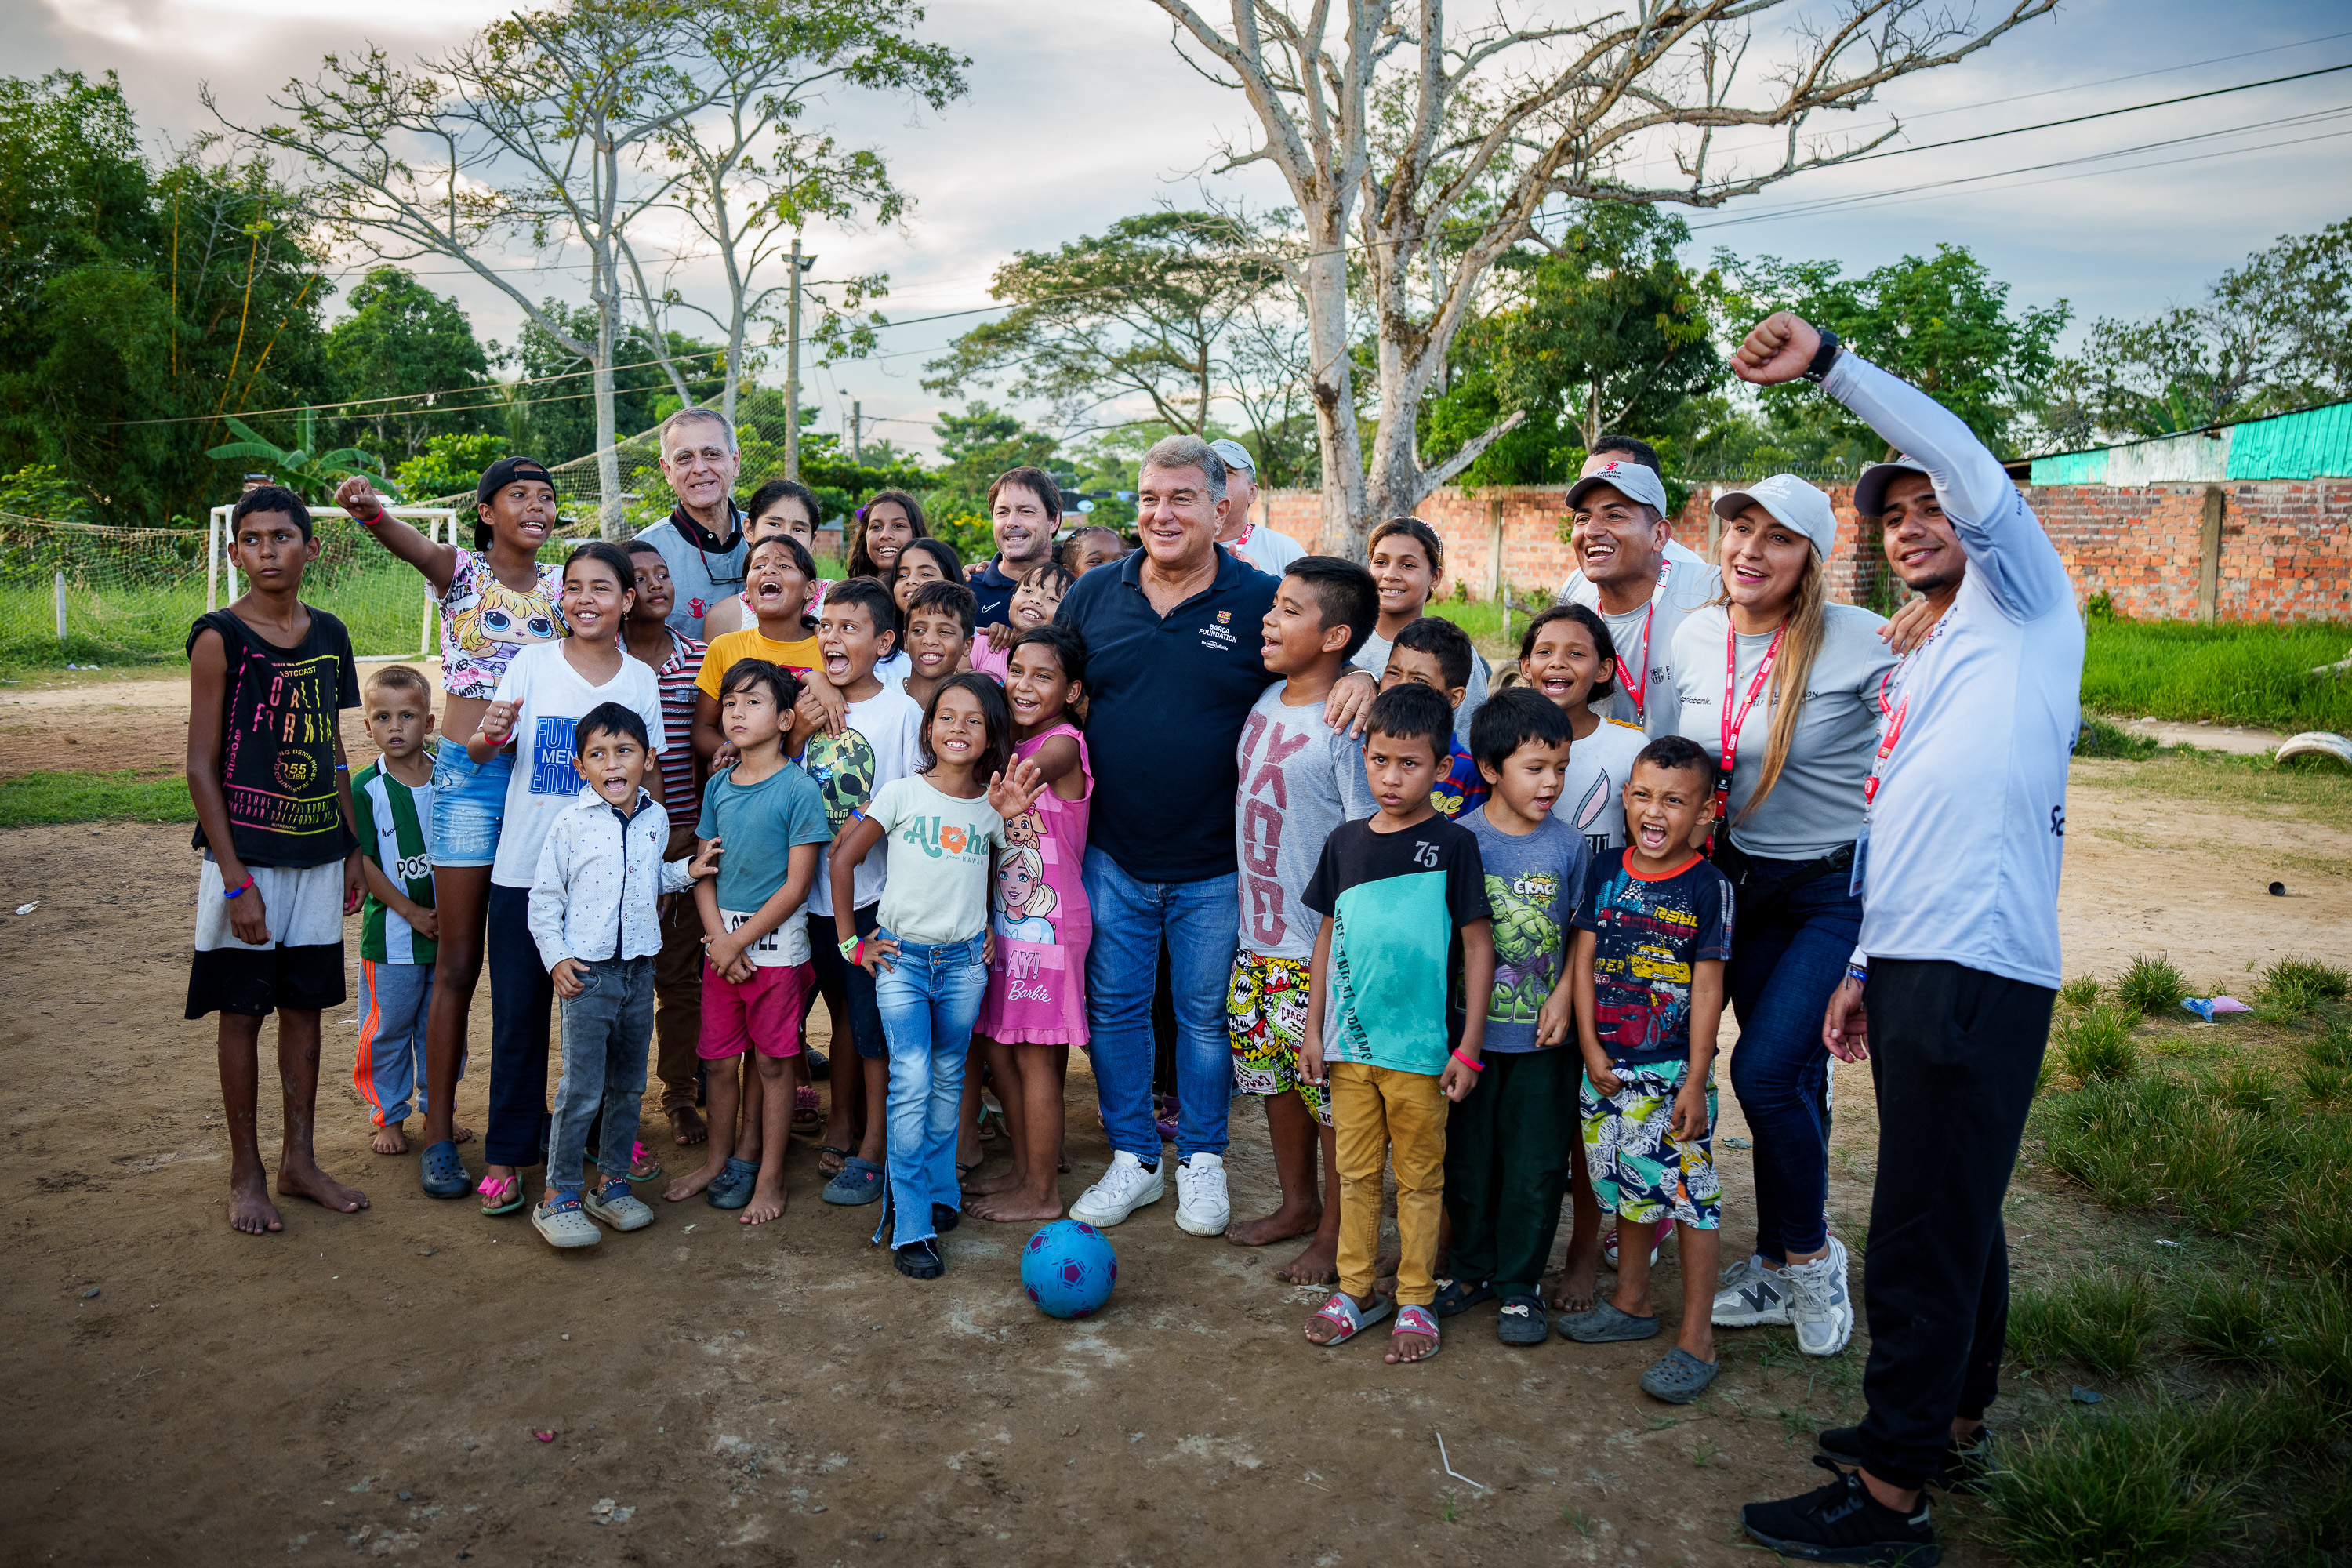 Joan Laporta visits FC Barcelona Foundation projects in Colombia to support refugees and displaced persons